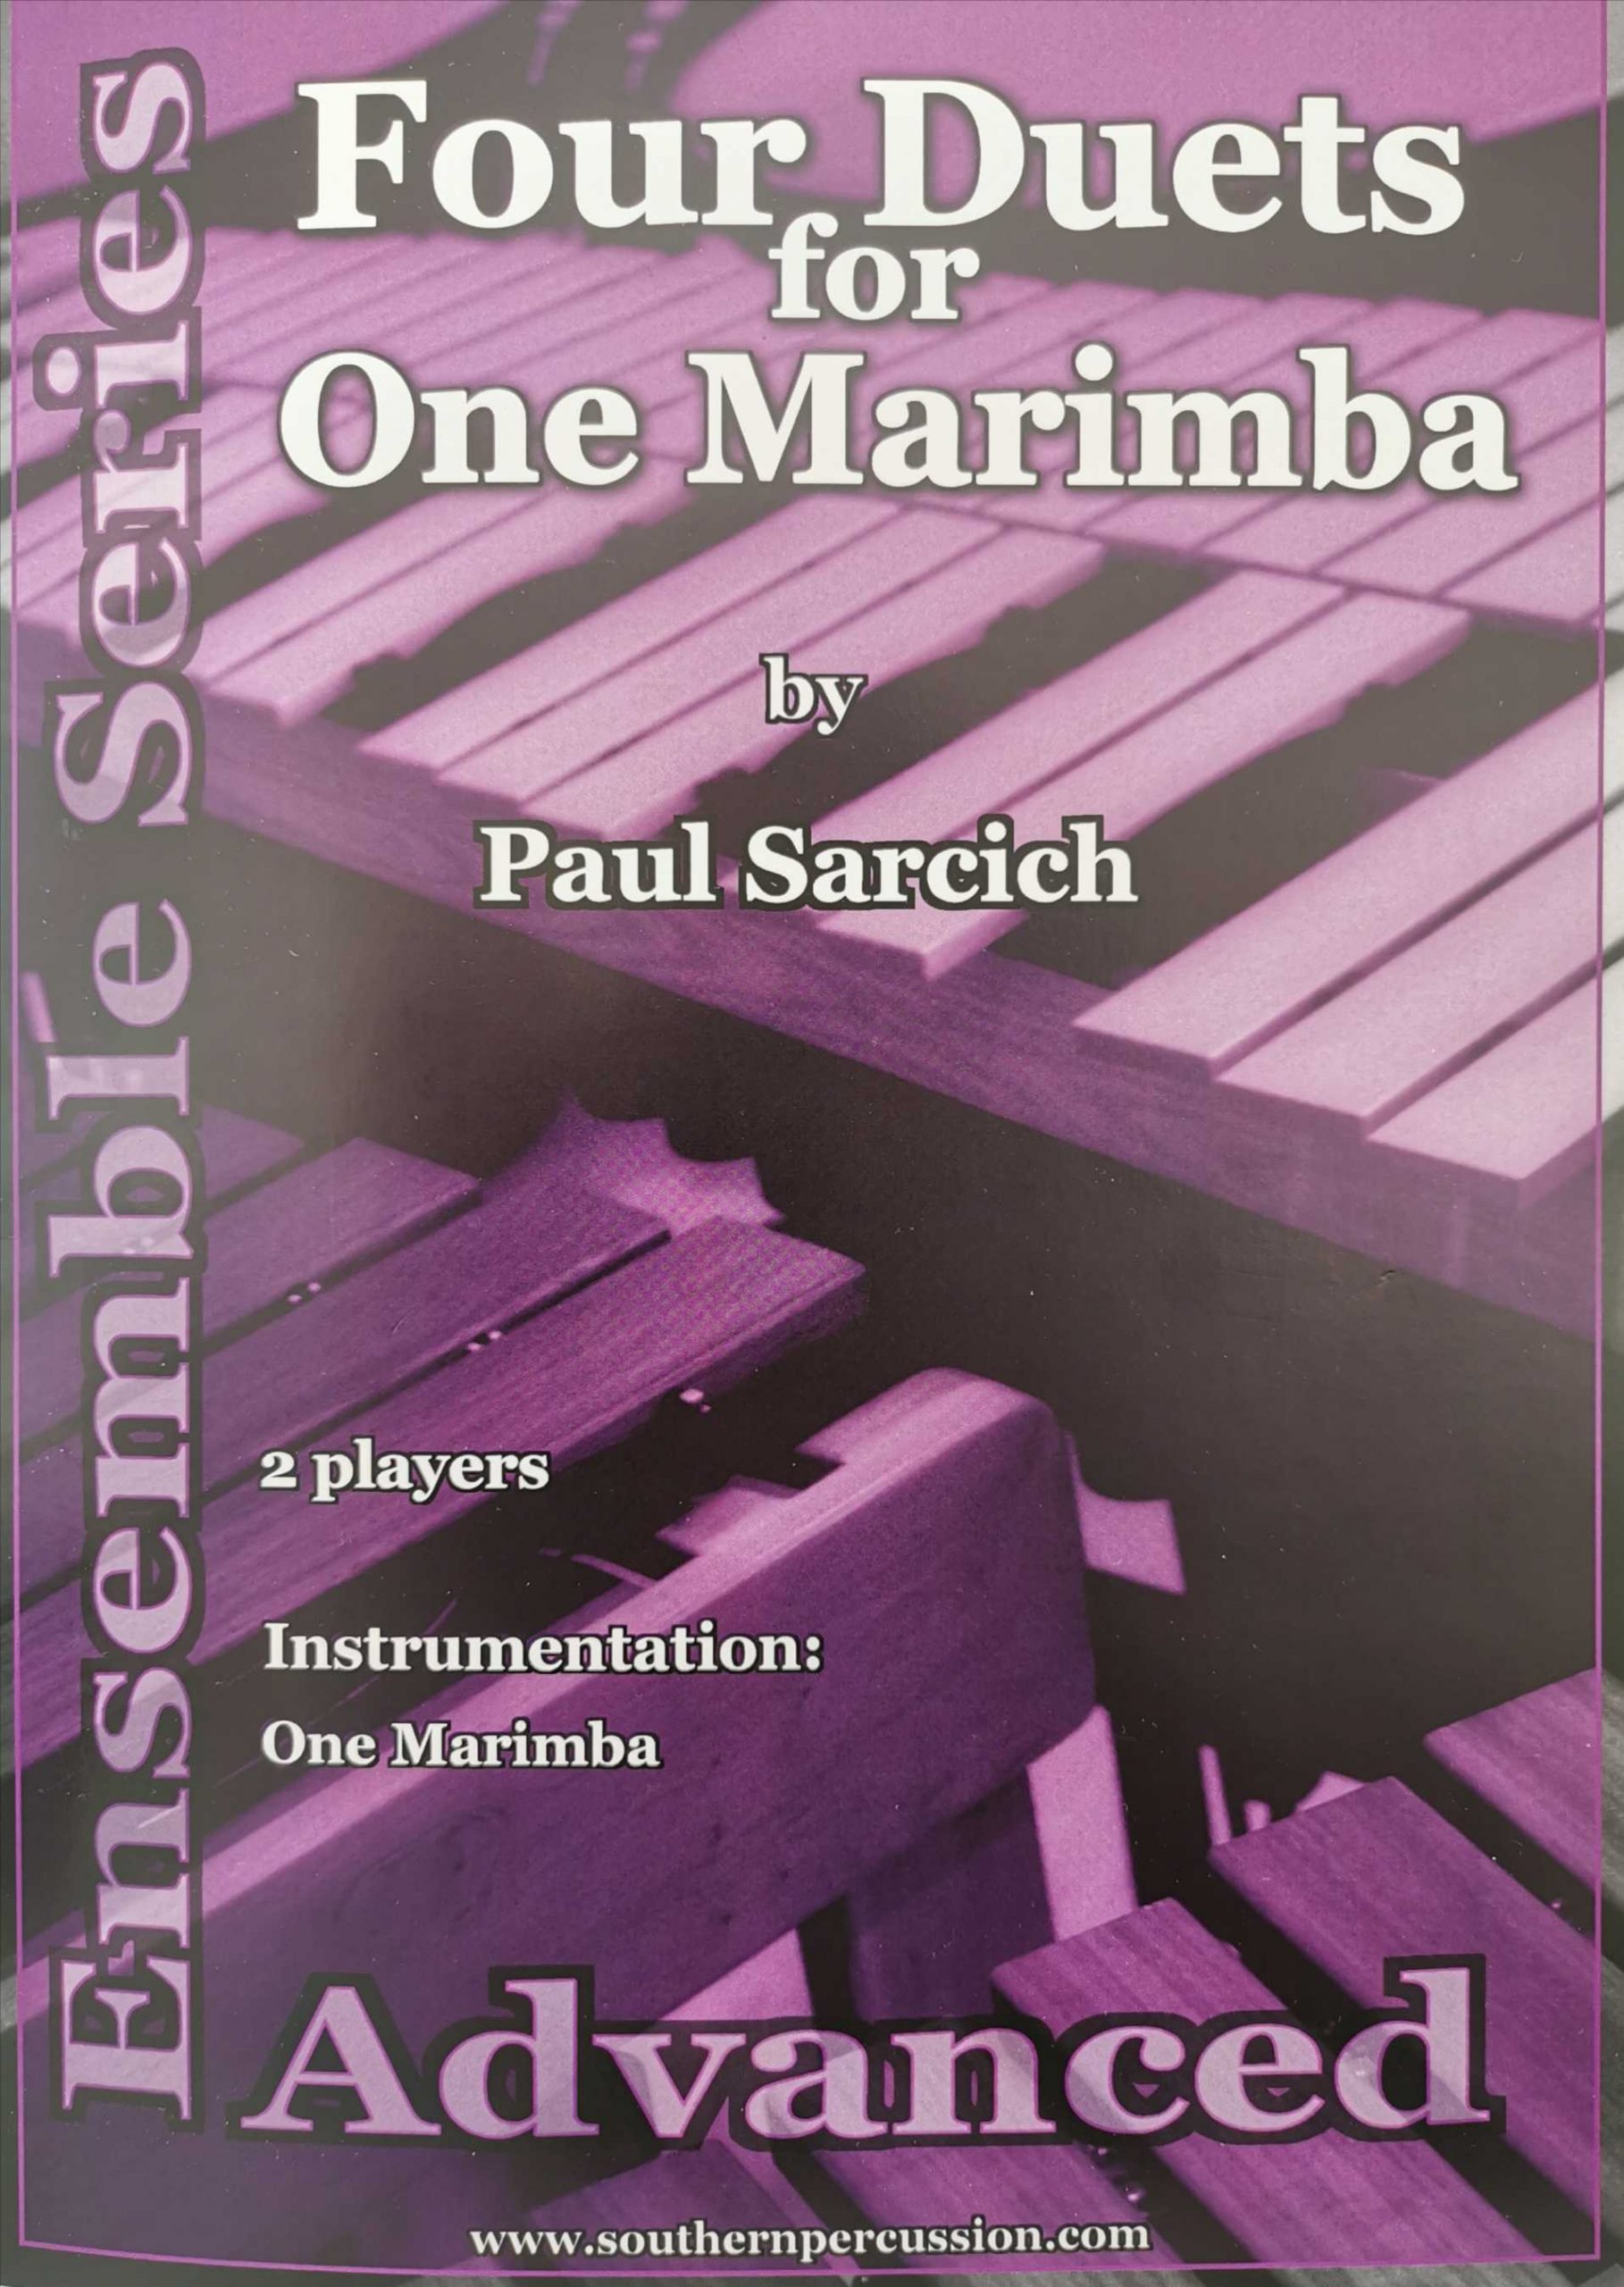 Four Duets for One Marimba by Paul Sarcich